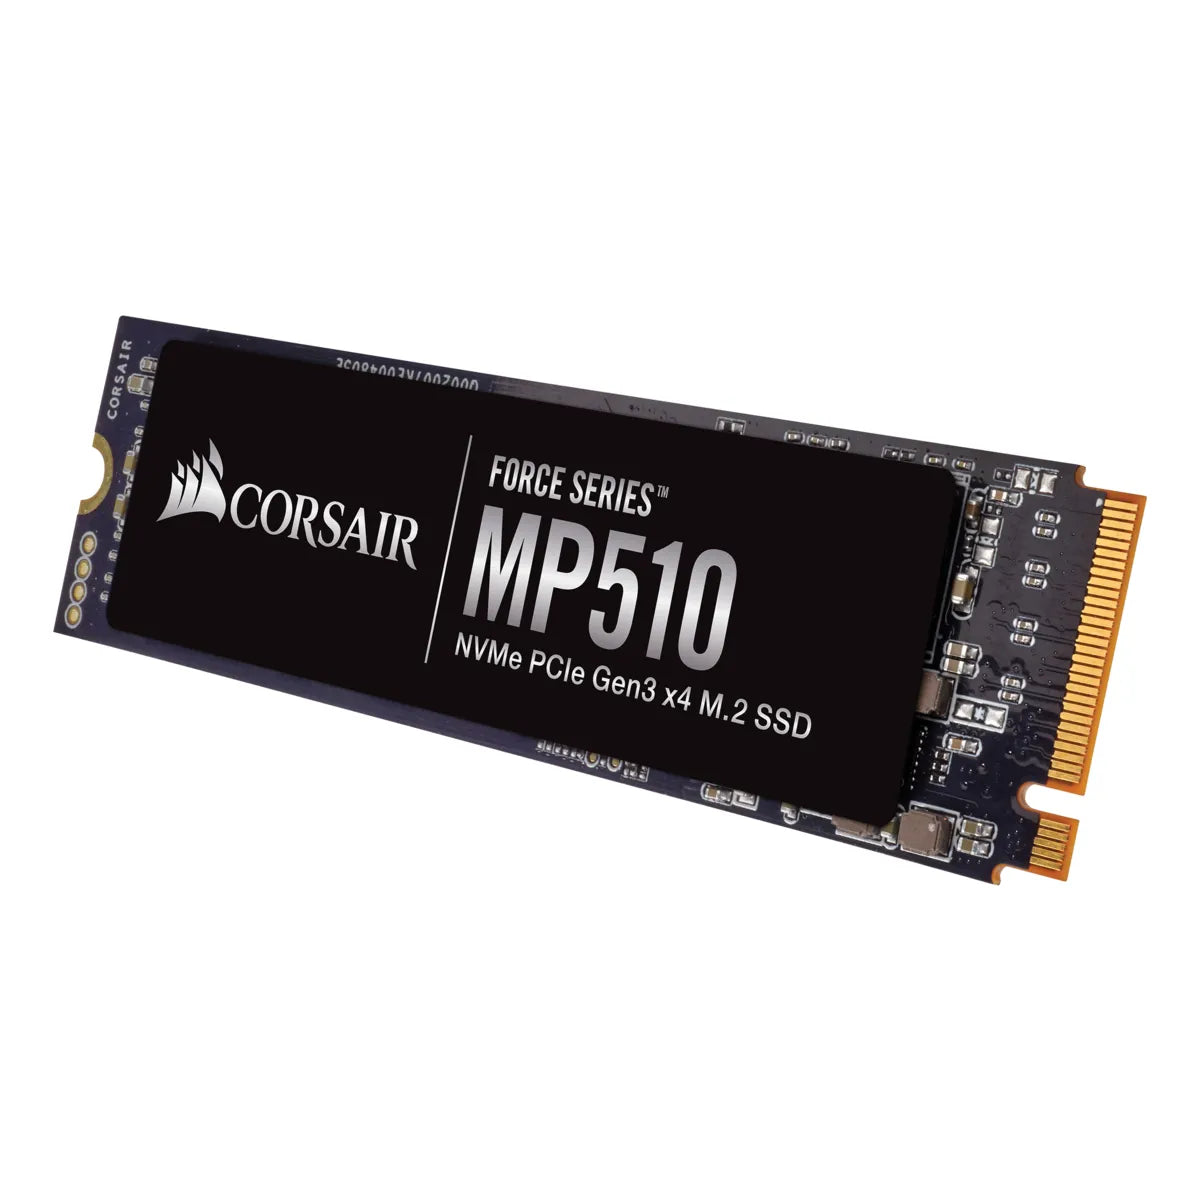 Corsair-Force-Series™-MP510-1920GB-M.2-SSD;-Read-Up-to-3;480MB/s;-Write-Up-to-2;700MB/s---2280